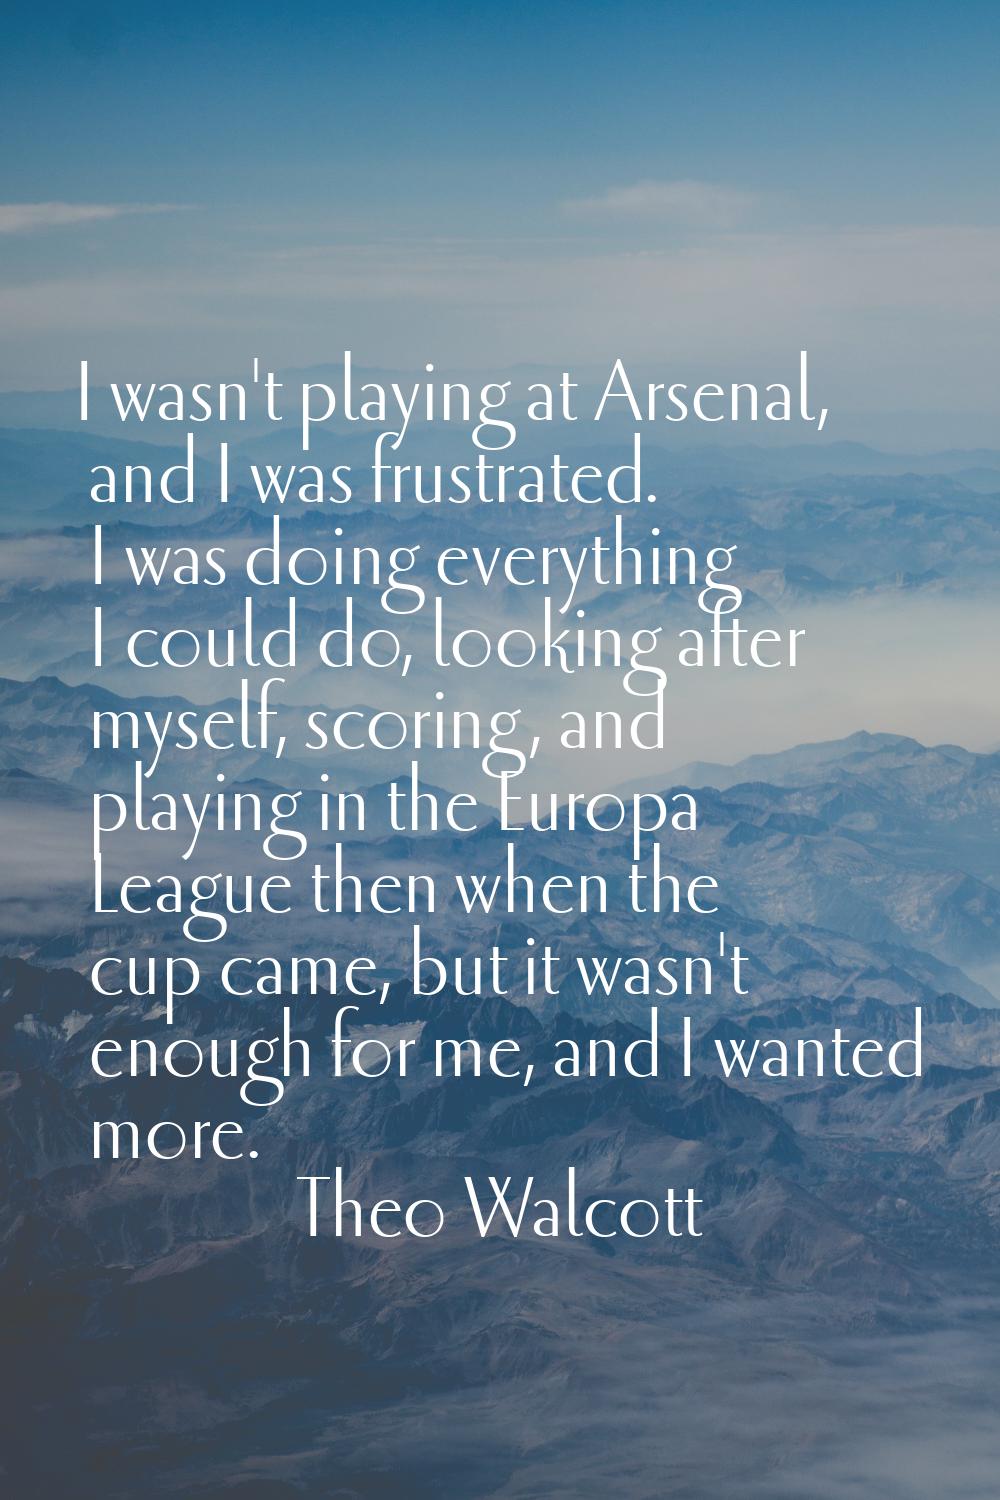 I wasn't playing at Arsenal, and I was frustrated. I was doing everything I could do, looking after